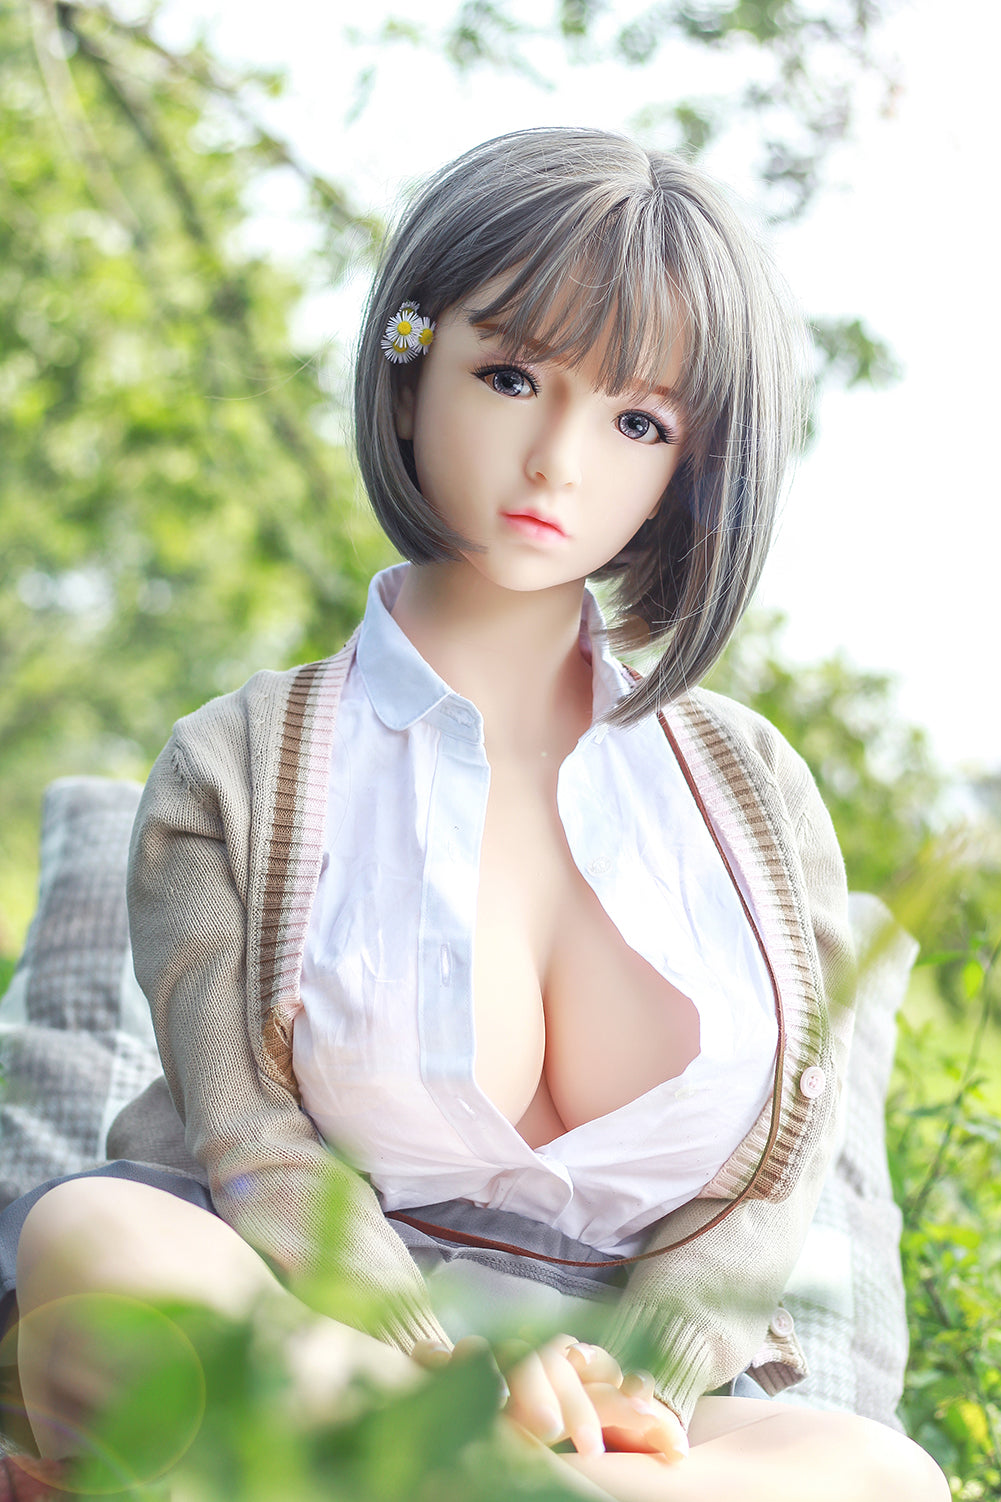 Suka - 4ft7in (140cm) Japanese Girl Big Boobs with Student Hair Adorable Sex Doll